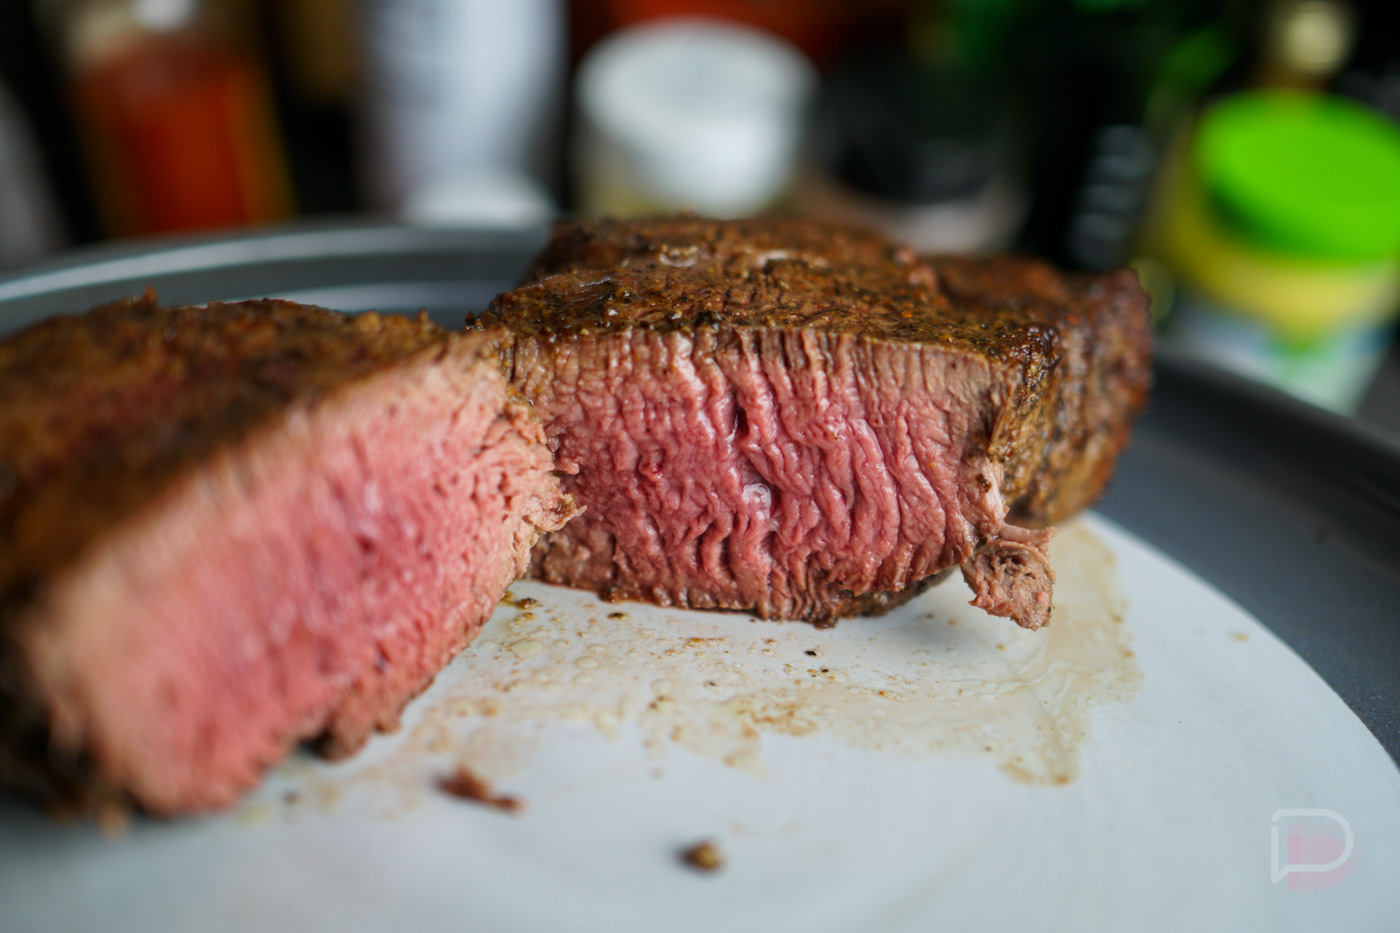 How To Know When Your Meat is Cooked - Yummly Smart Thermometer